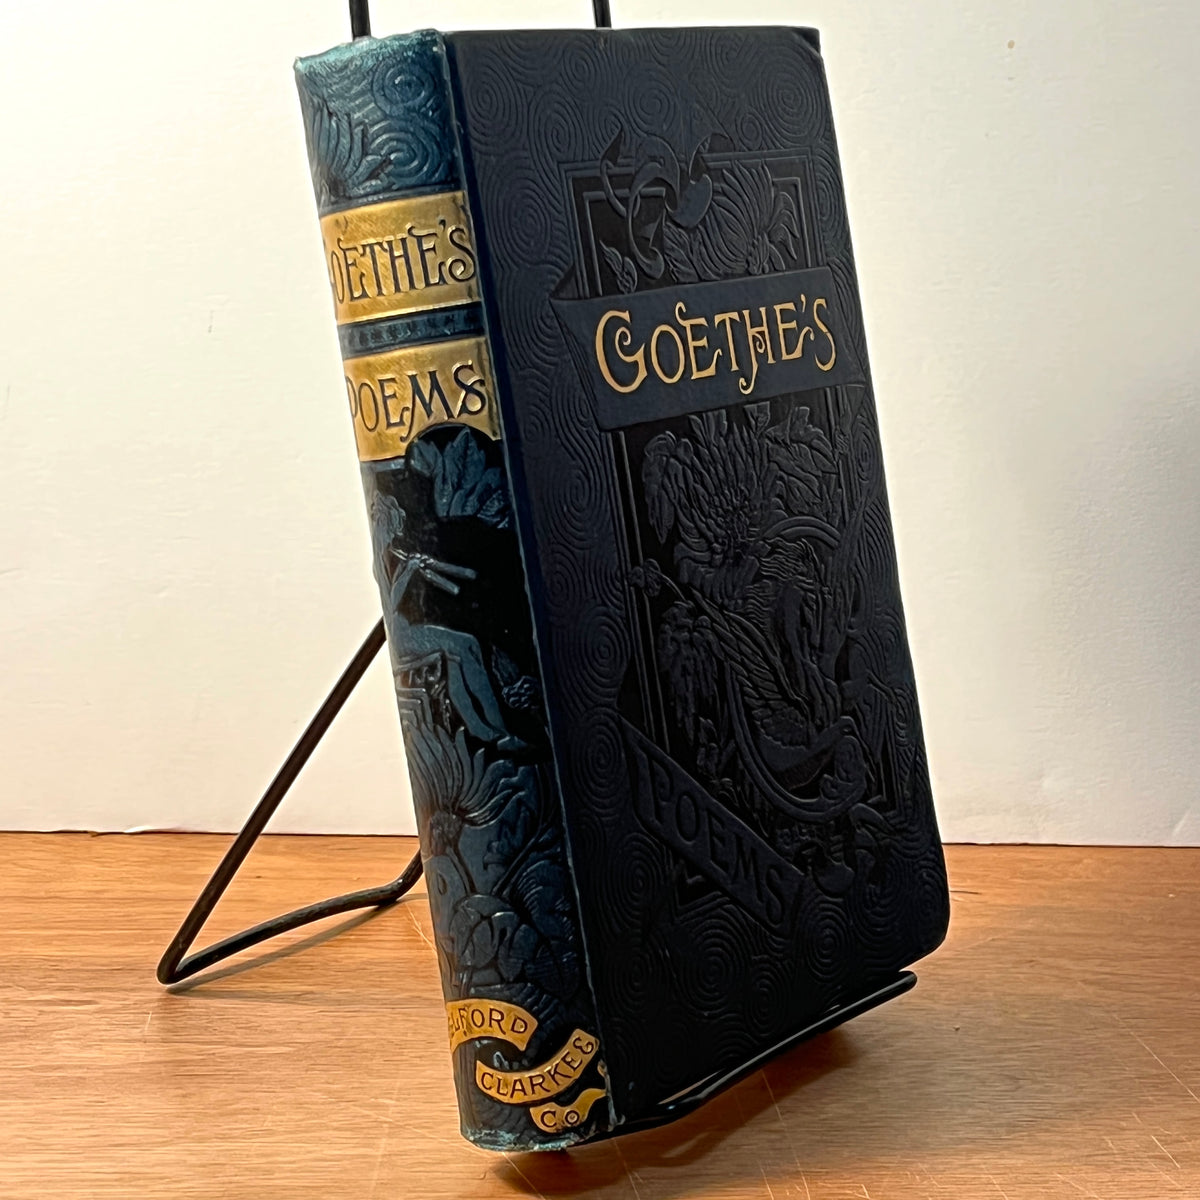 The Poems of Goethe, Belford, Clarkes, & Co., 1874, Second Edition, HC, VG.